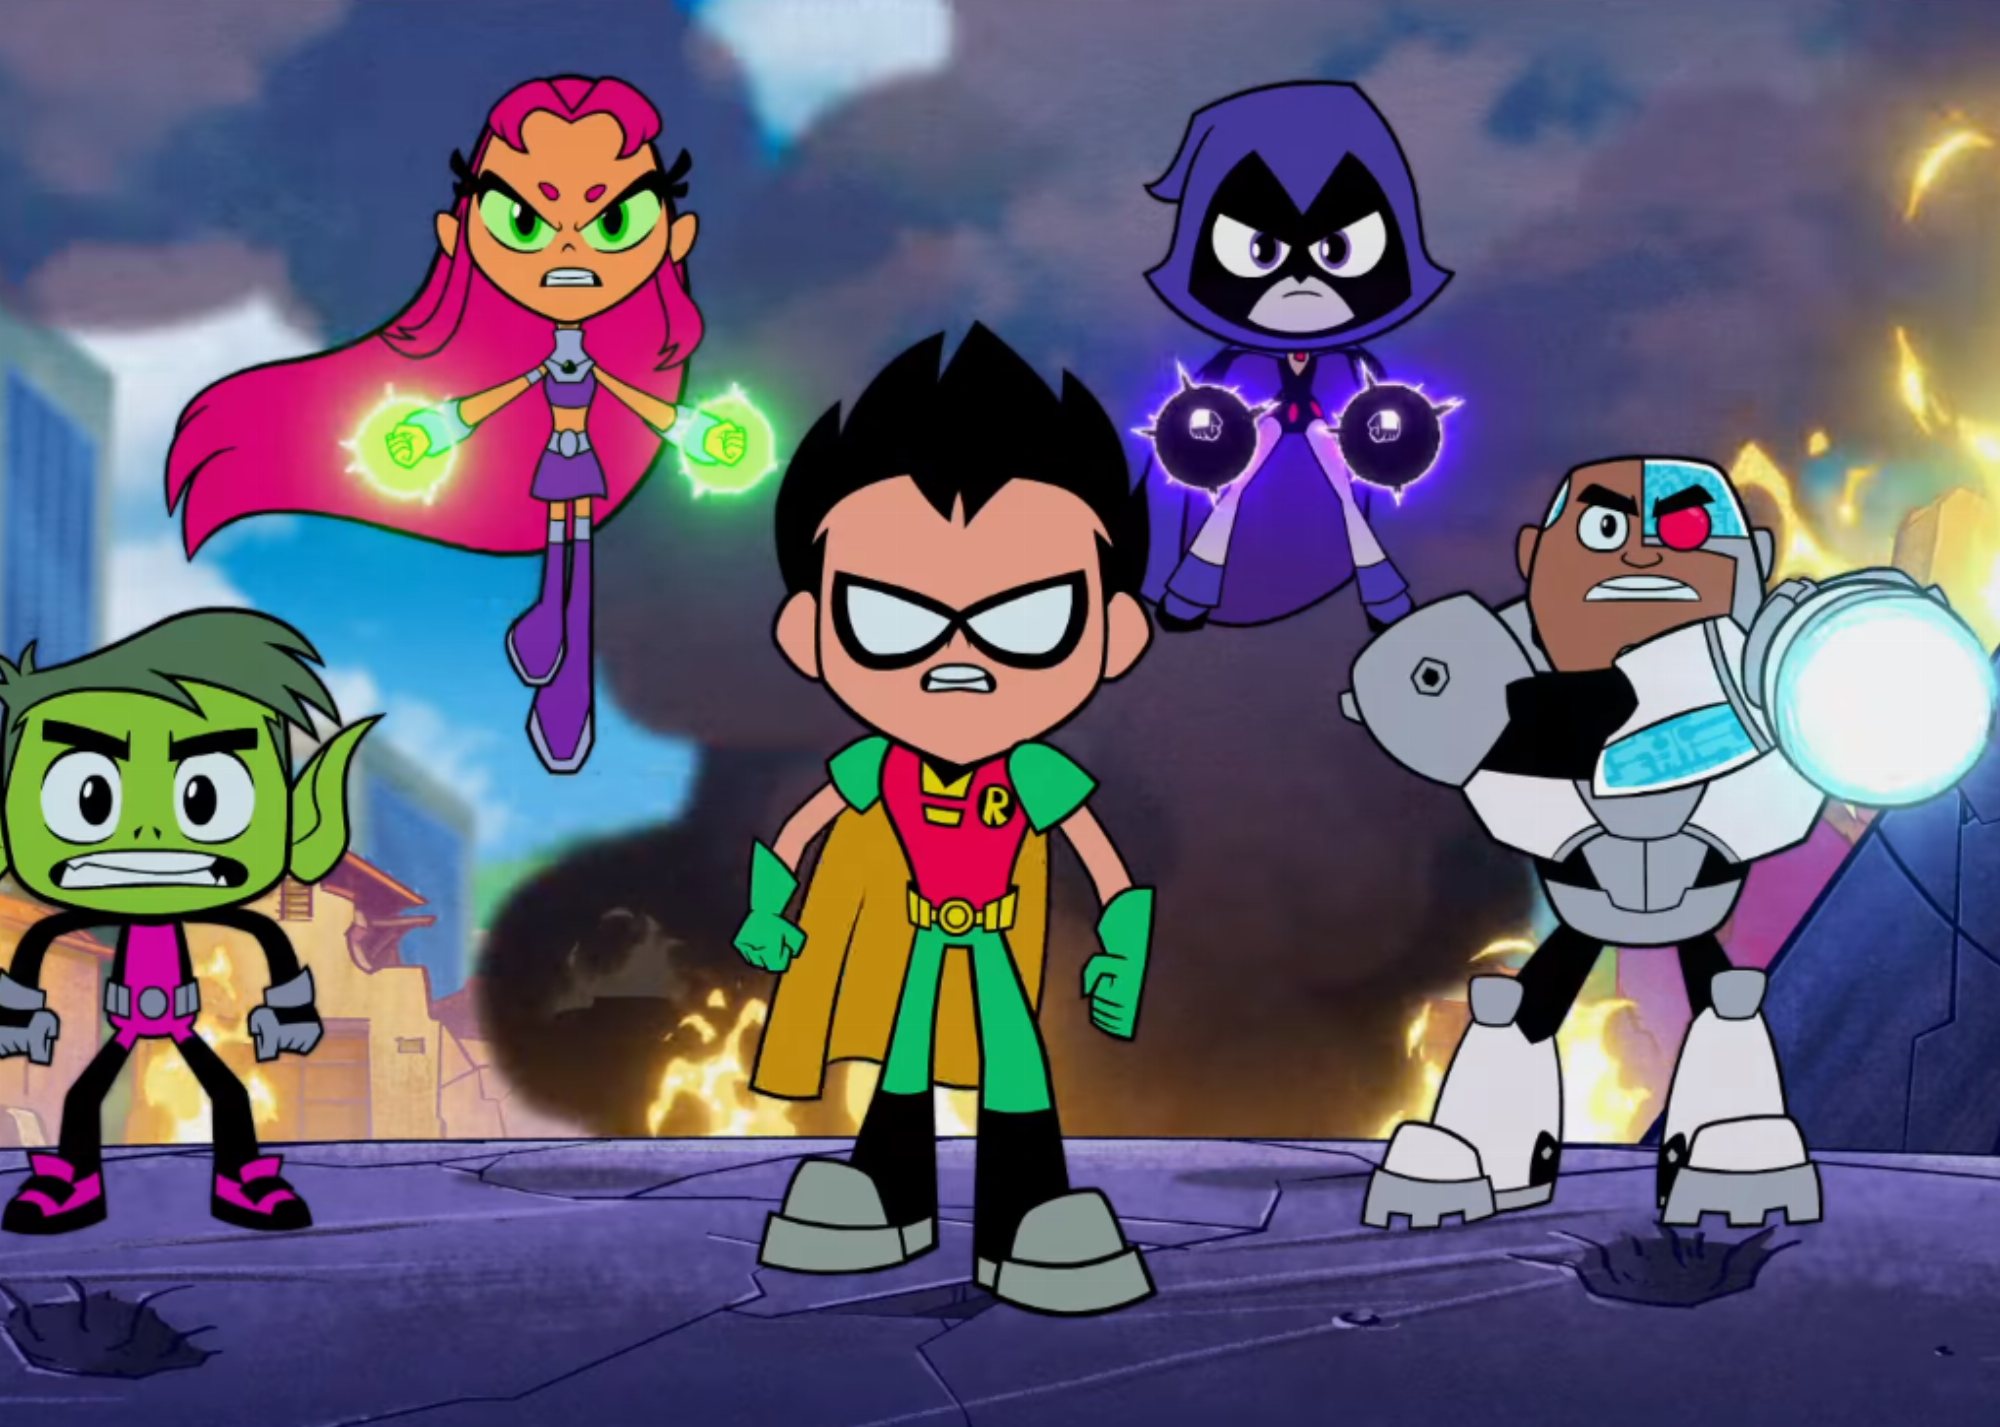 Teen Titans Go! To the Movies' Hits Theaters This Week - Heads Up by Scout  Life